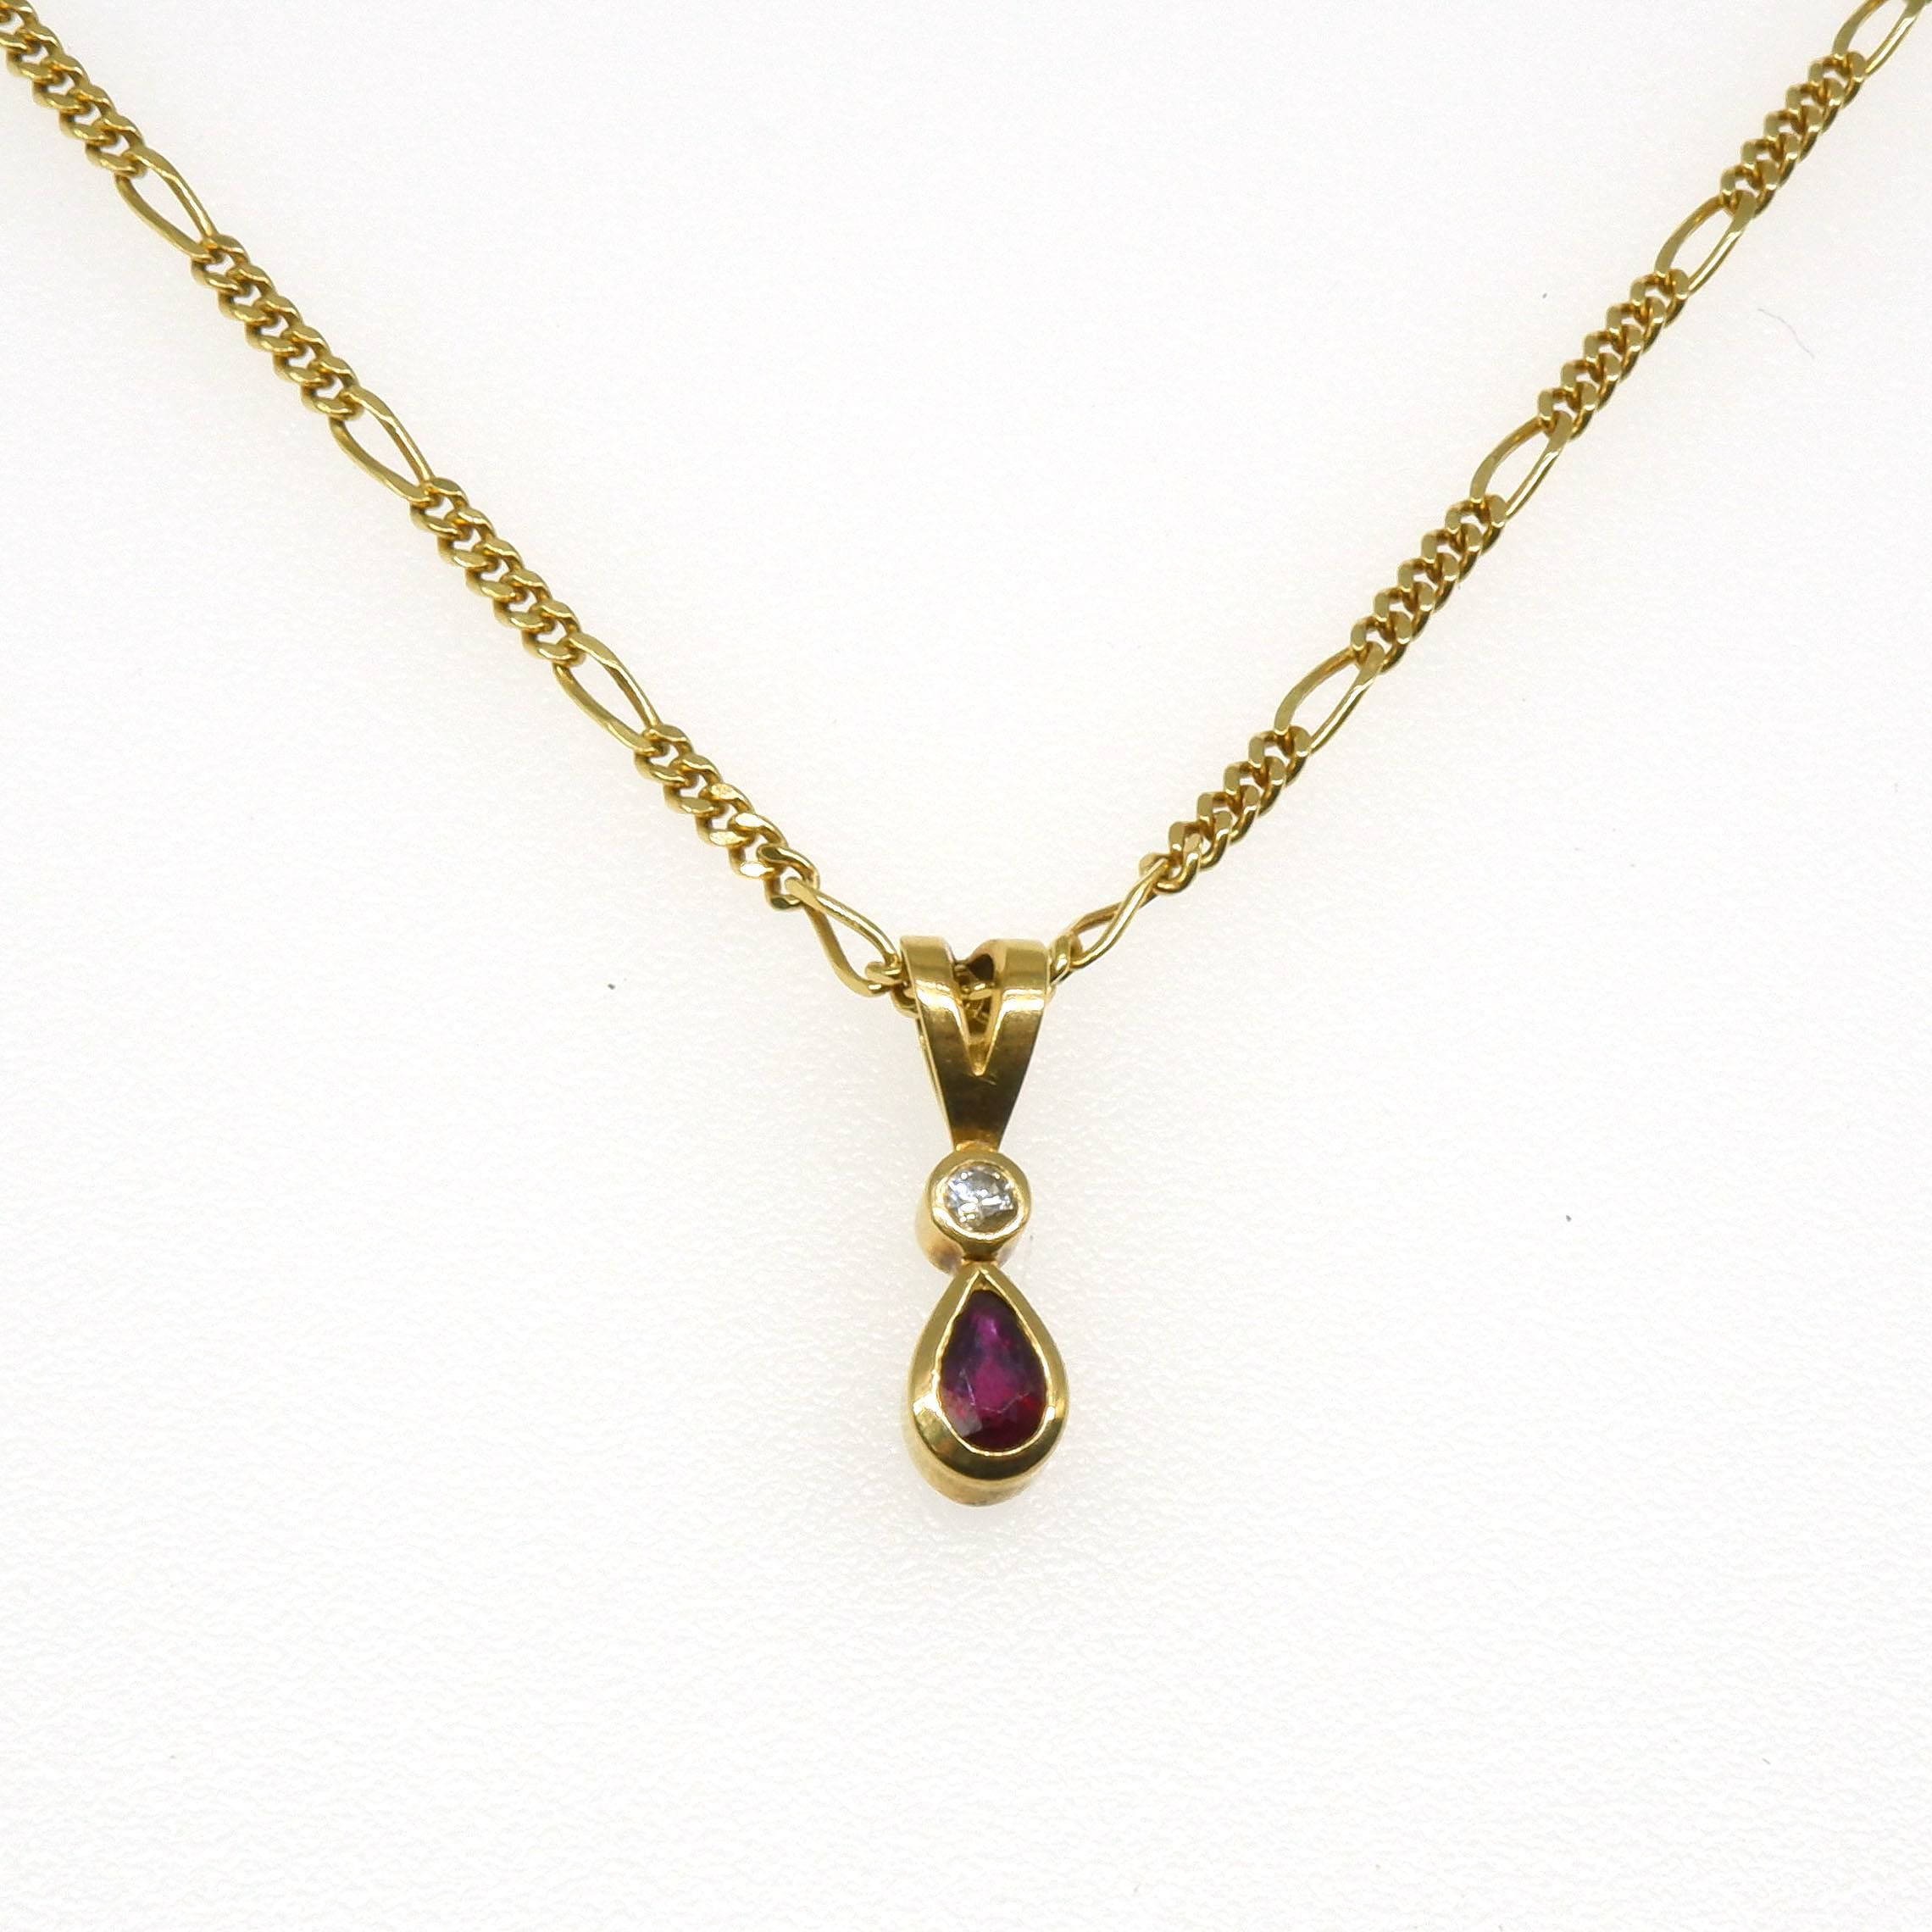 '18ct Yellow Gold Long and Short Filed Curb Link Chain, Pendant with Tear Dropped Shaped Ruby and Round Brilliant Cut Diamond Above'